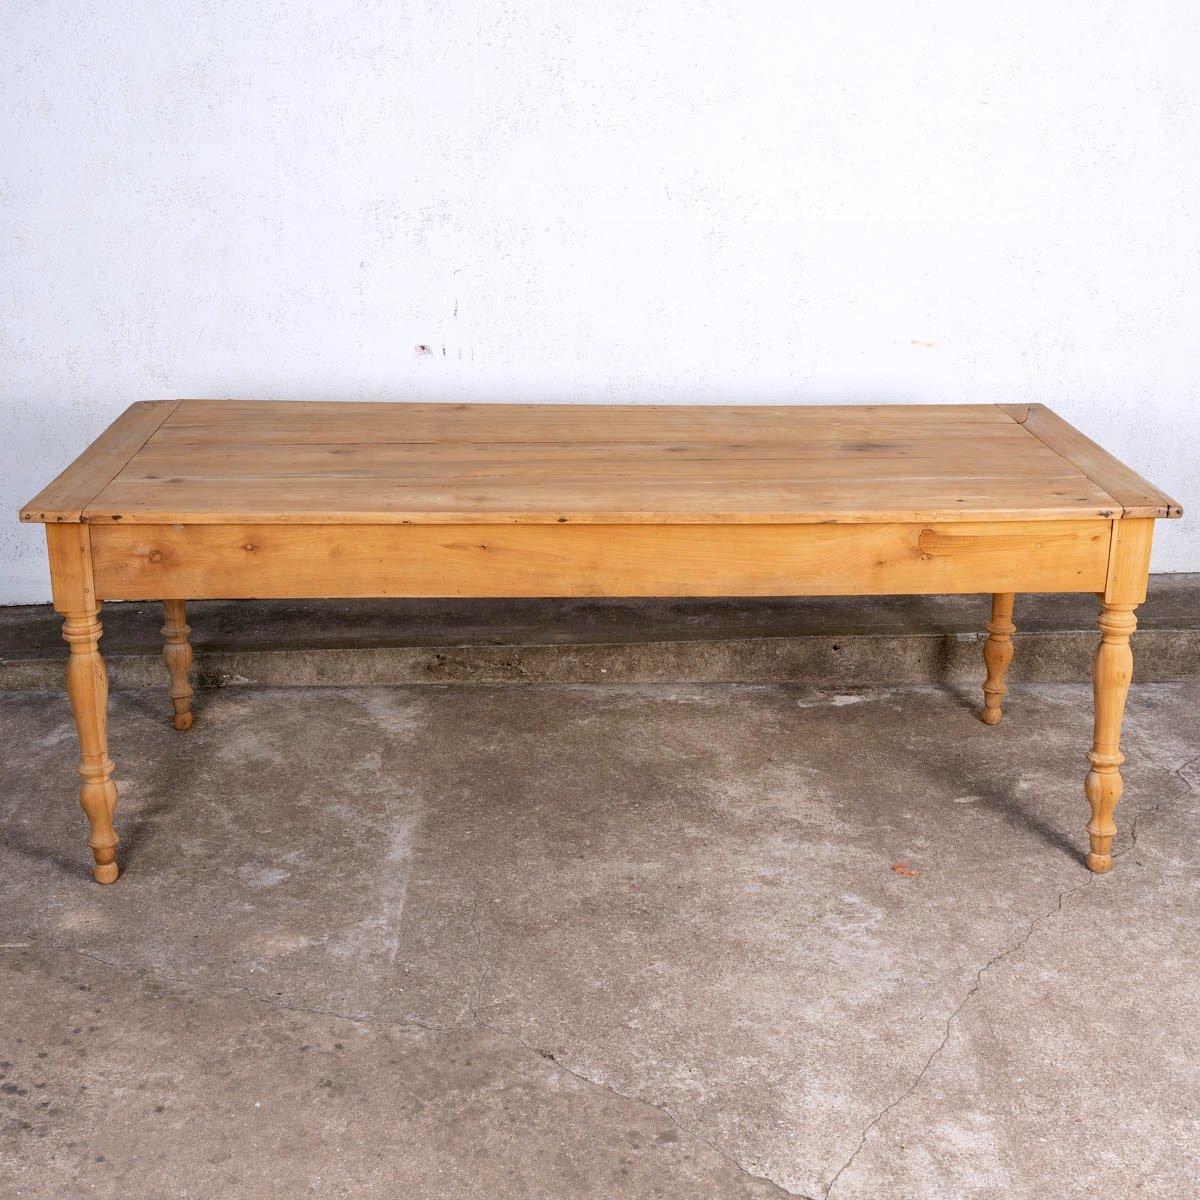 Farm Table - Solid Cherry Wood - Made In Normandy - Period : XVIIIth Century 2